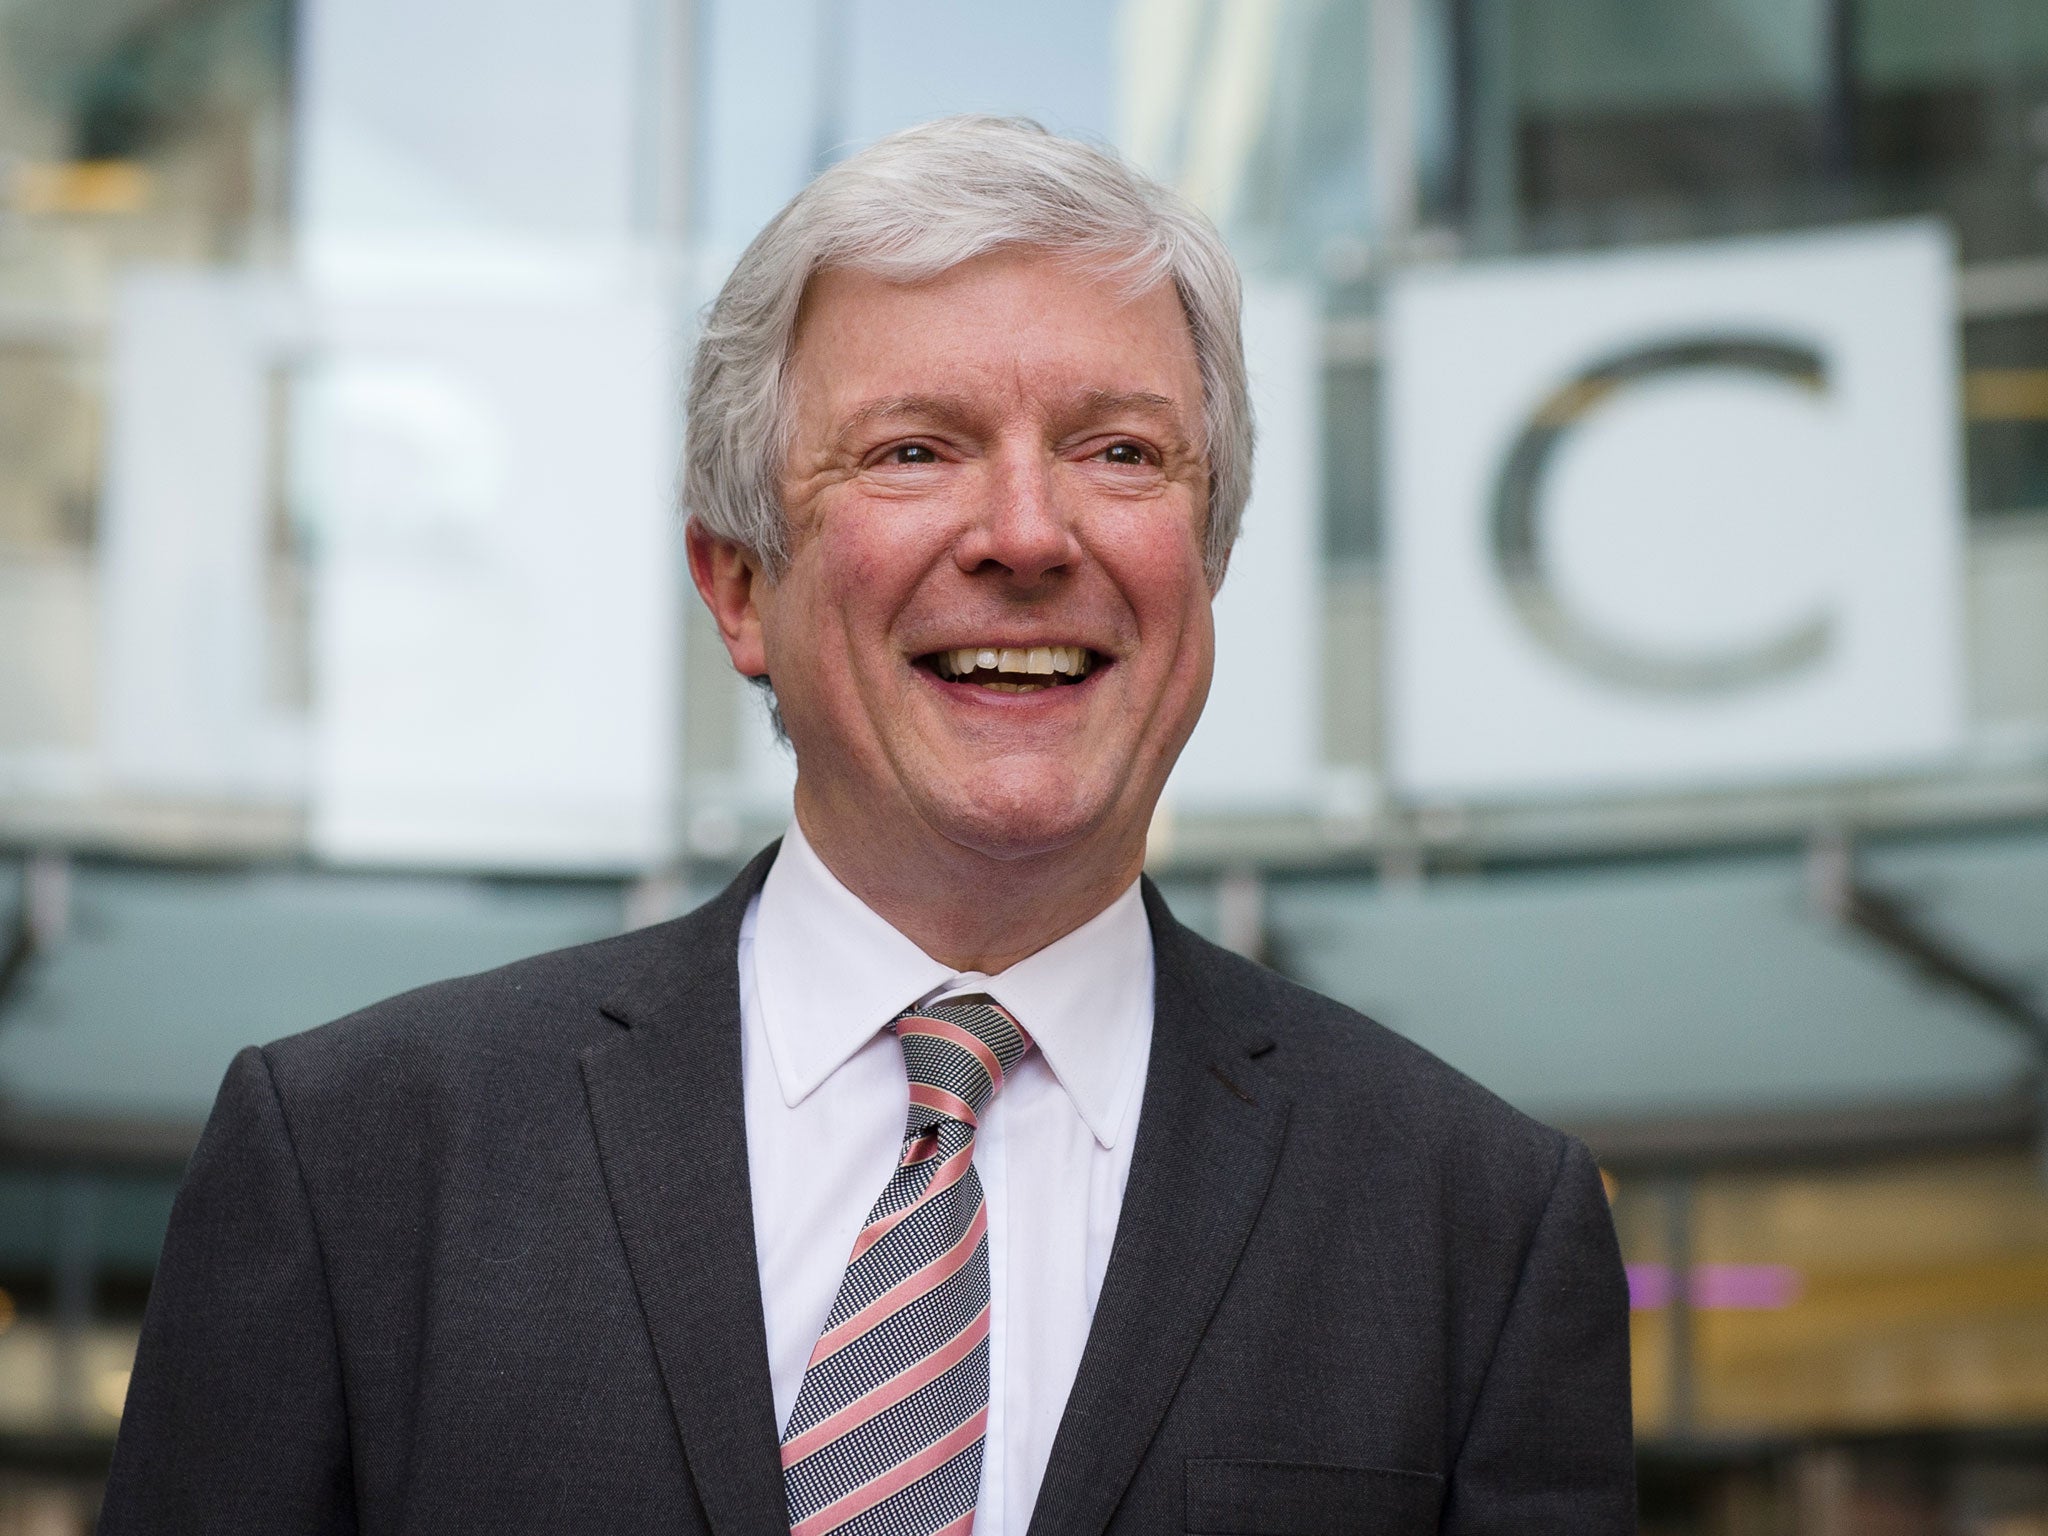 Tony Hall, the current director general of the BBC, may not have the option of a commemorative oil painting at the end of his tenure